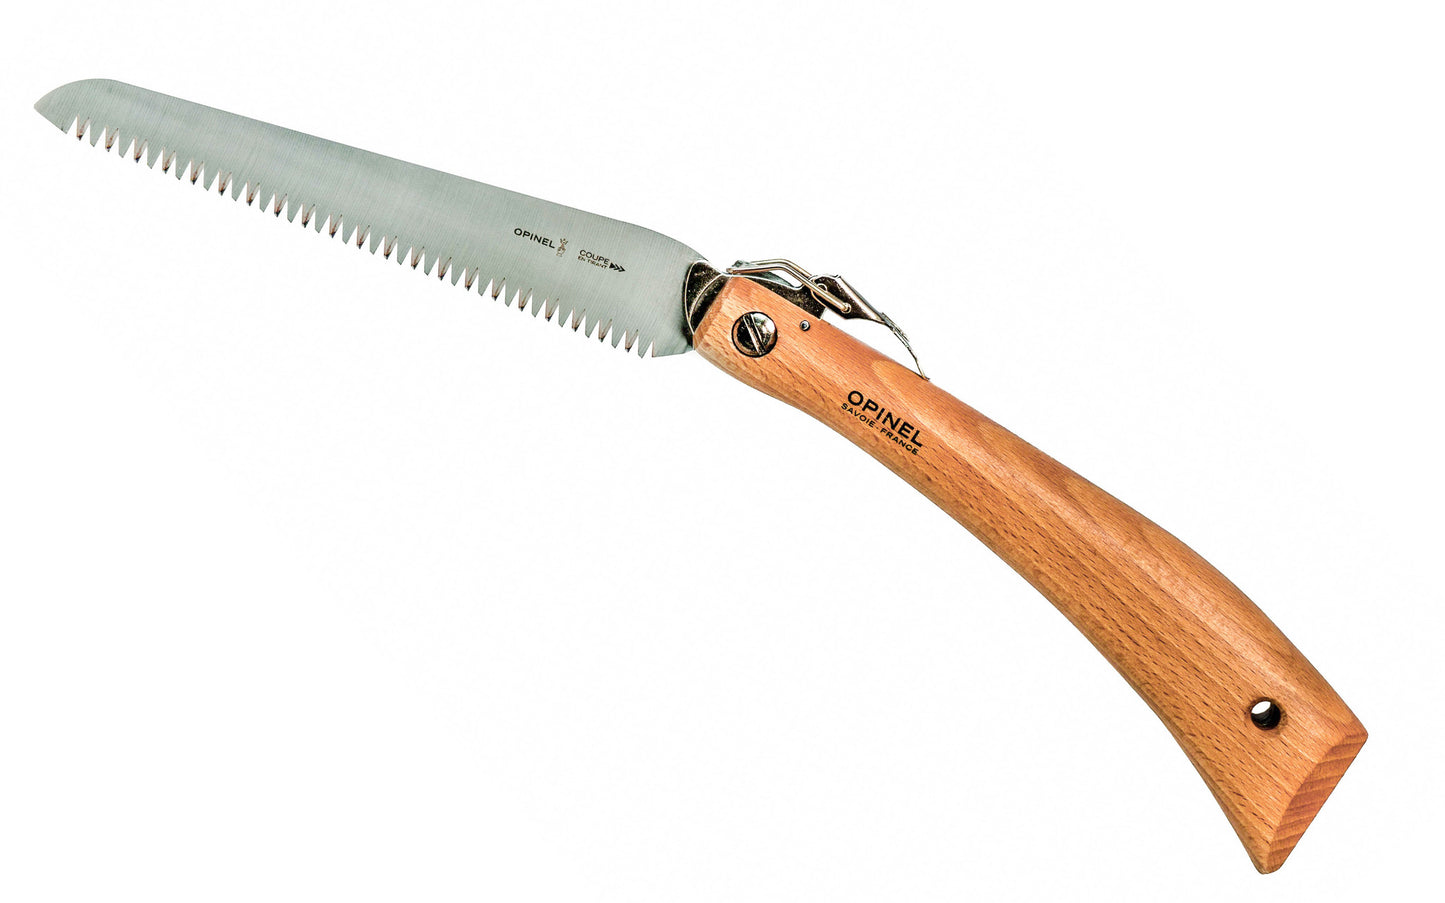 Opinel Garden Saw No. 18 ~  Made in France ~ 7-1/8" long blade ~ Foldable blade with locking clip ~ Made of carbon steel with an anti-corrosive coating ~ Beechwood handle 